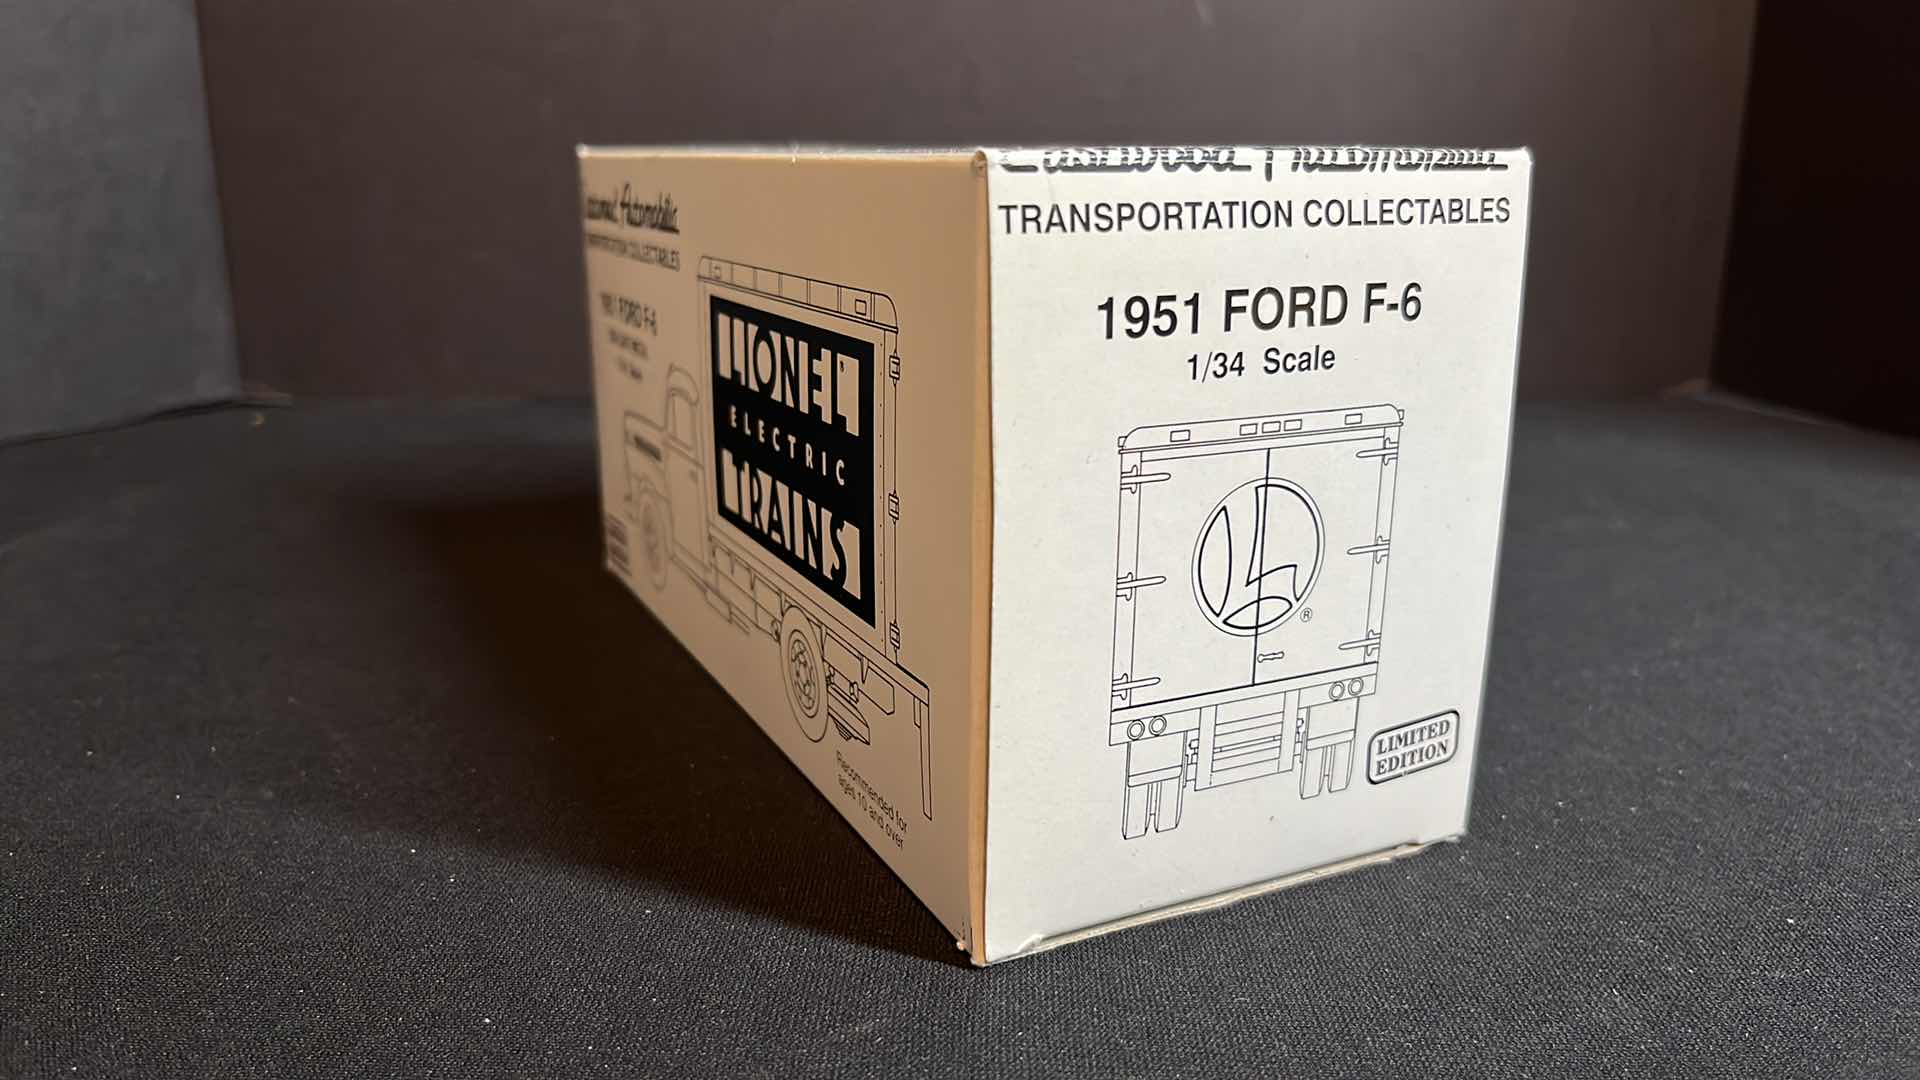 Photo 8 of NIB FIRST GEAR INC EASTWOOD AUTOMOBILIA TRANSPORTATION COLLECTABLES LIONEL ELECTRIC TRAINS DIE-CAST METAL 1/34 SCALE 1951 FORD F-6, 1992 (STOCK #19-0104)